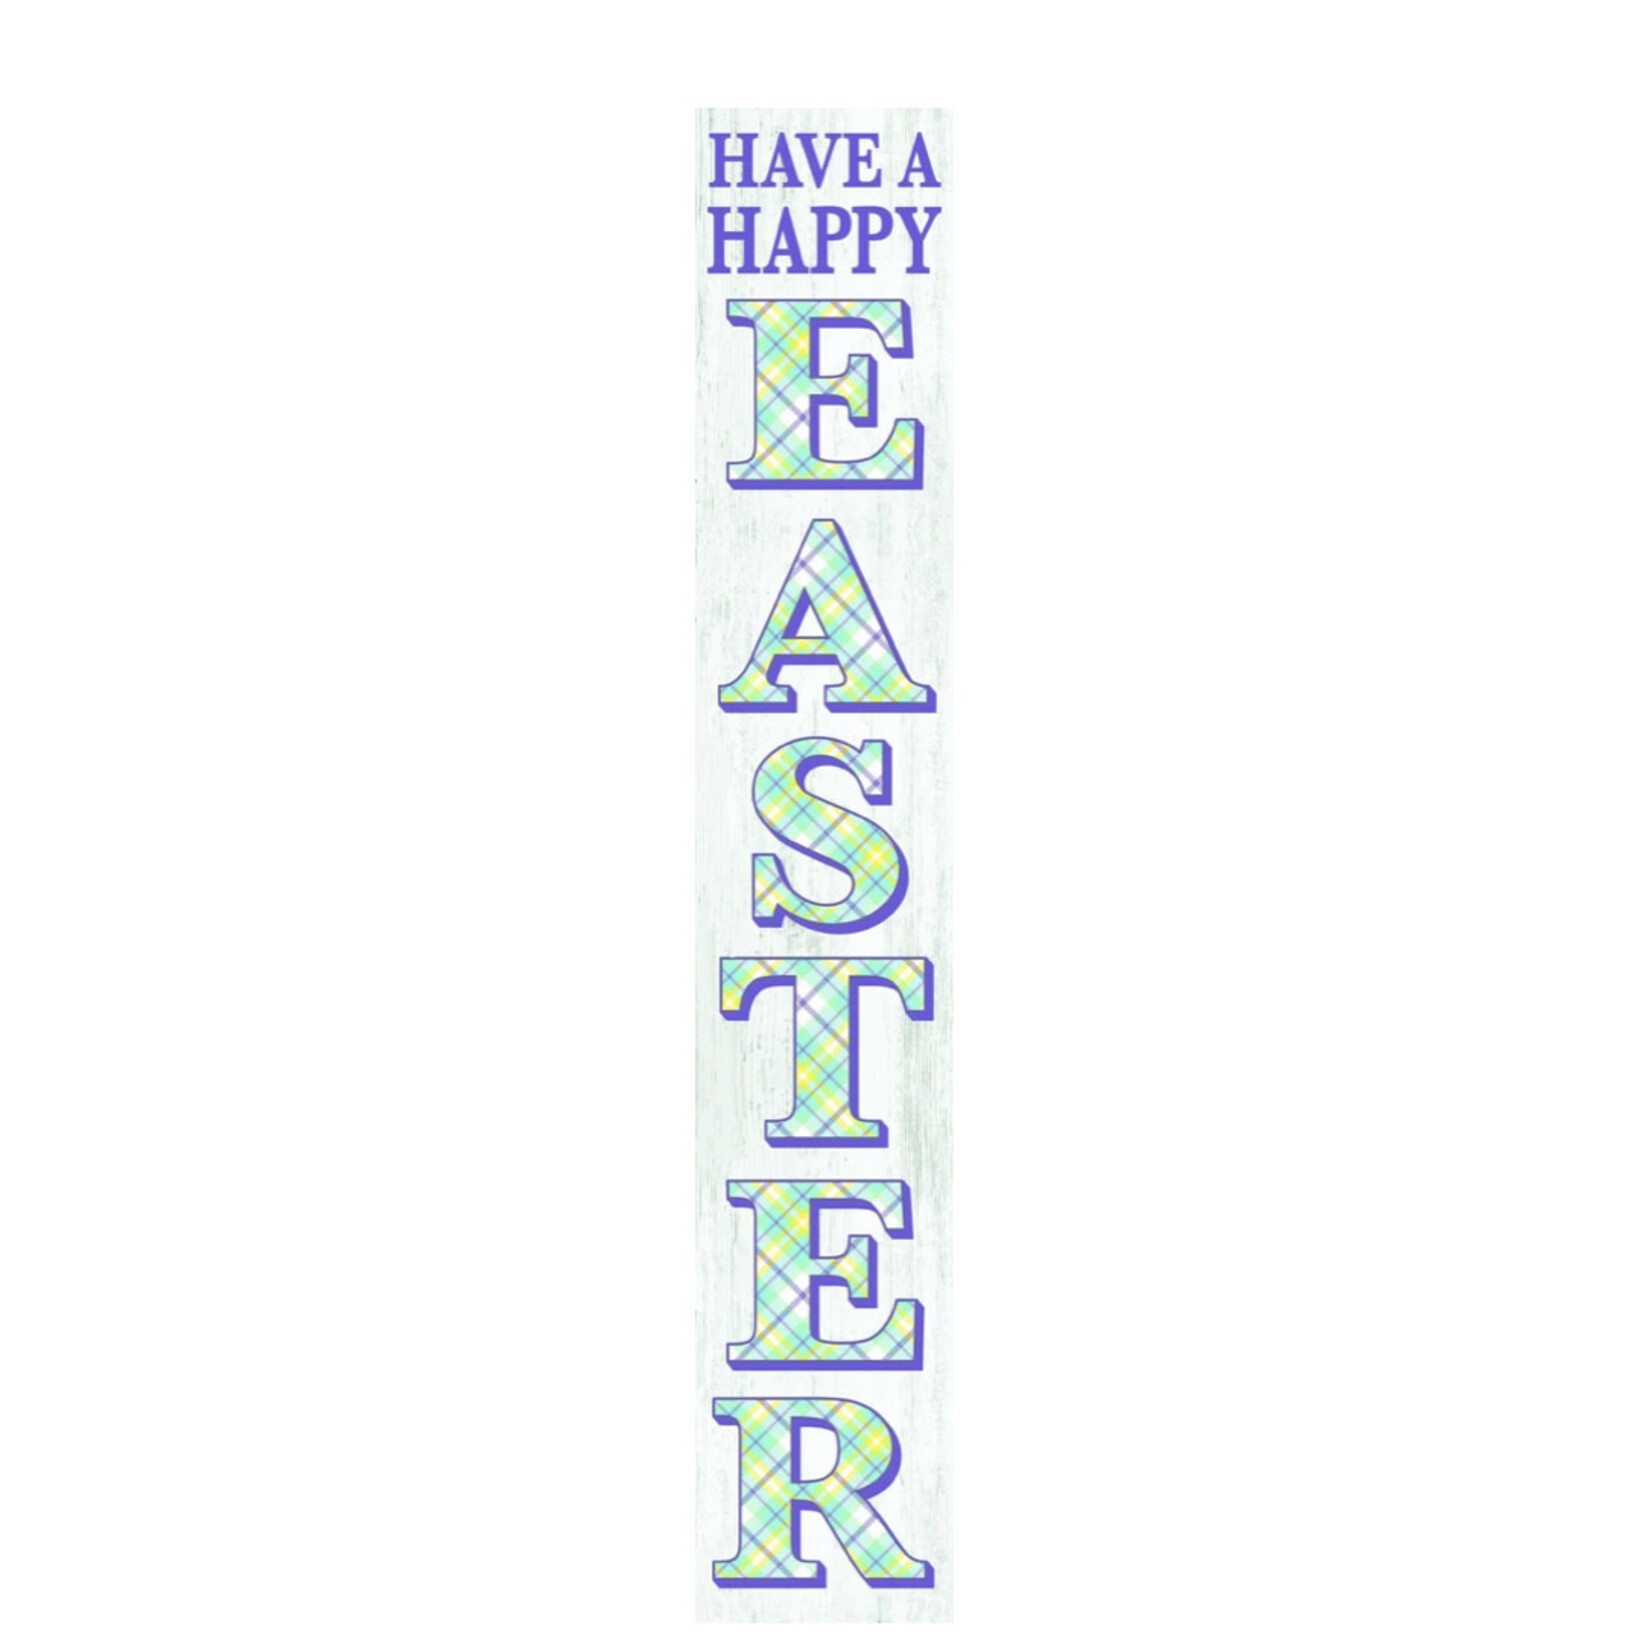 My Word! Have a Happy Easter Porch Board Sign